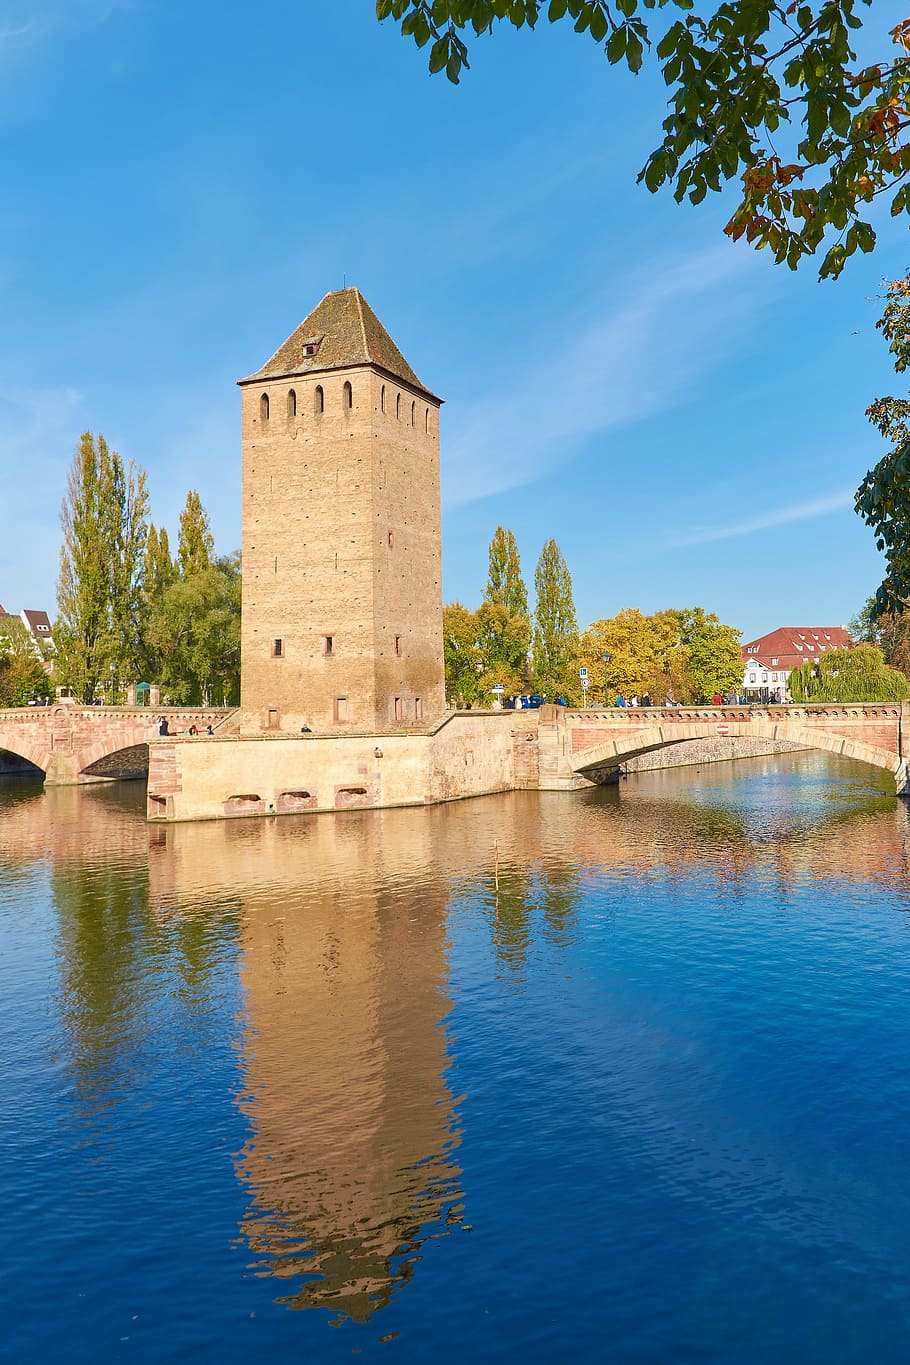 alsace, henry tower, pont envelopes, canon bastion, strasbourg, weir, tower, jembatan, sungai, lill